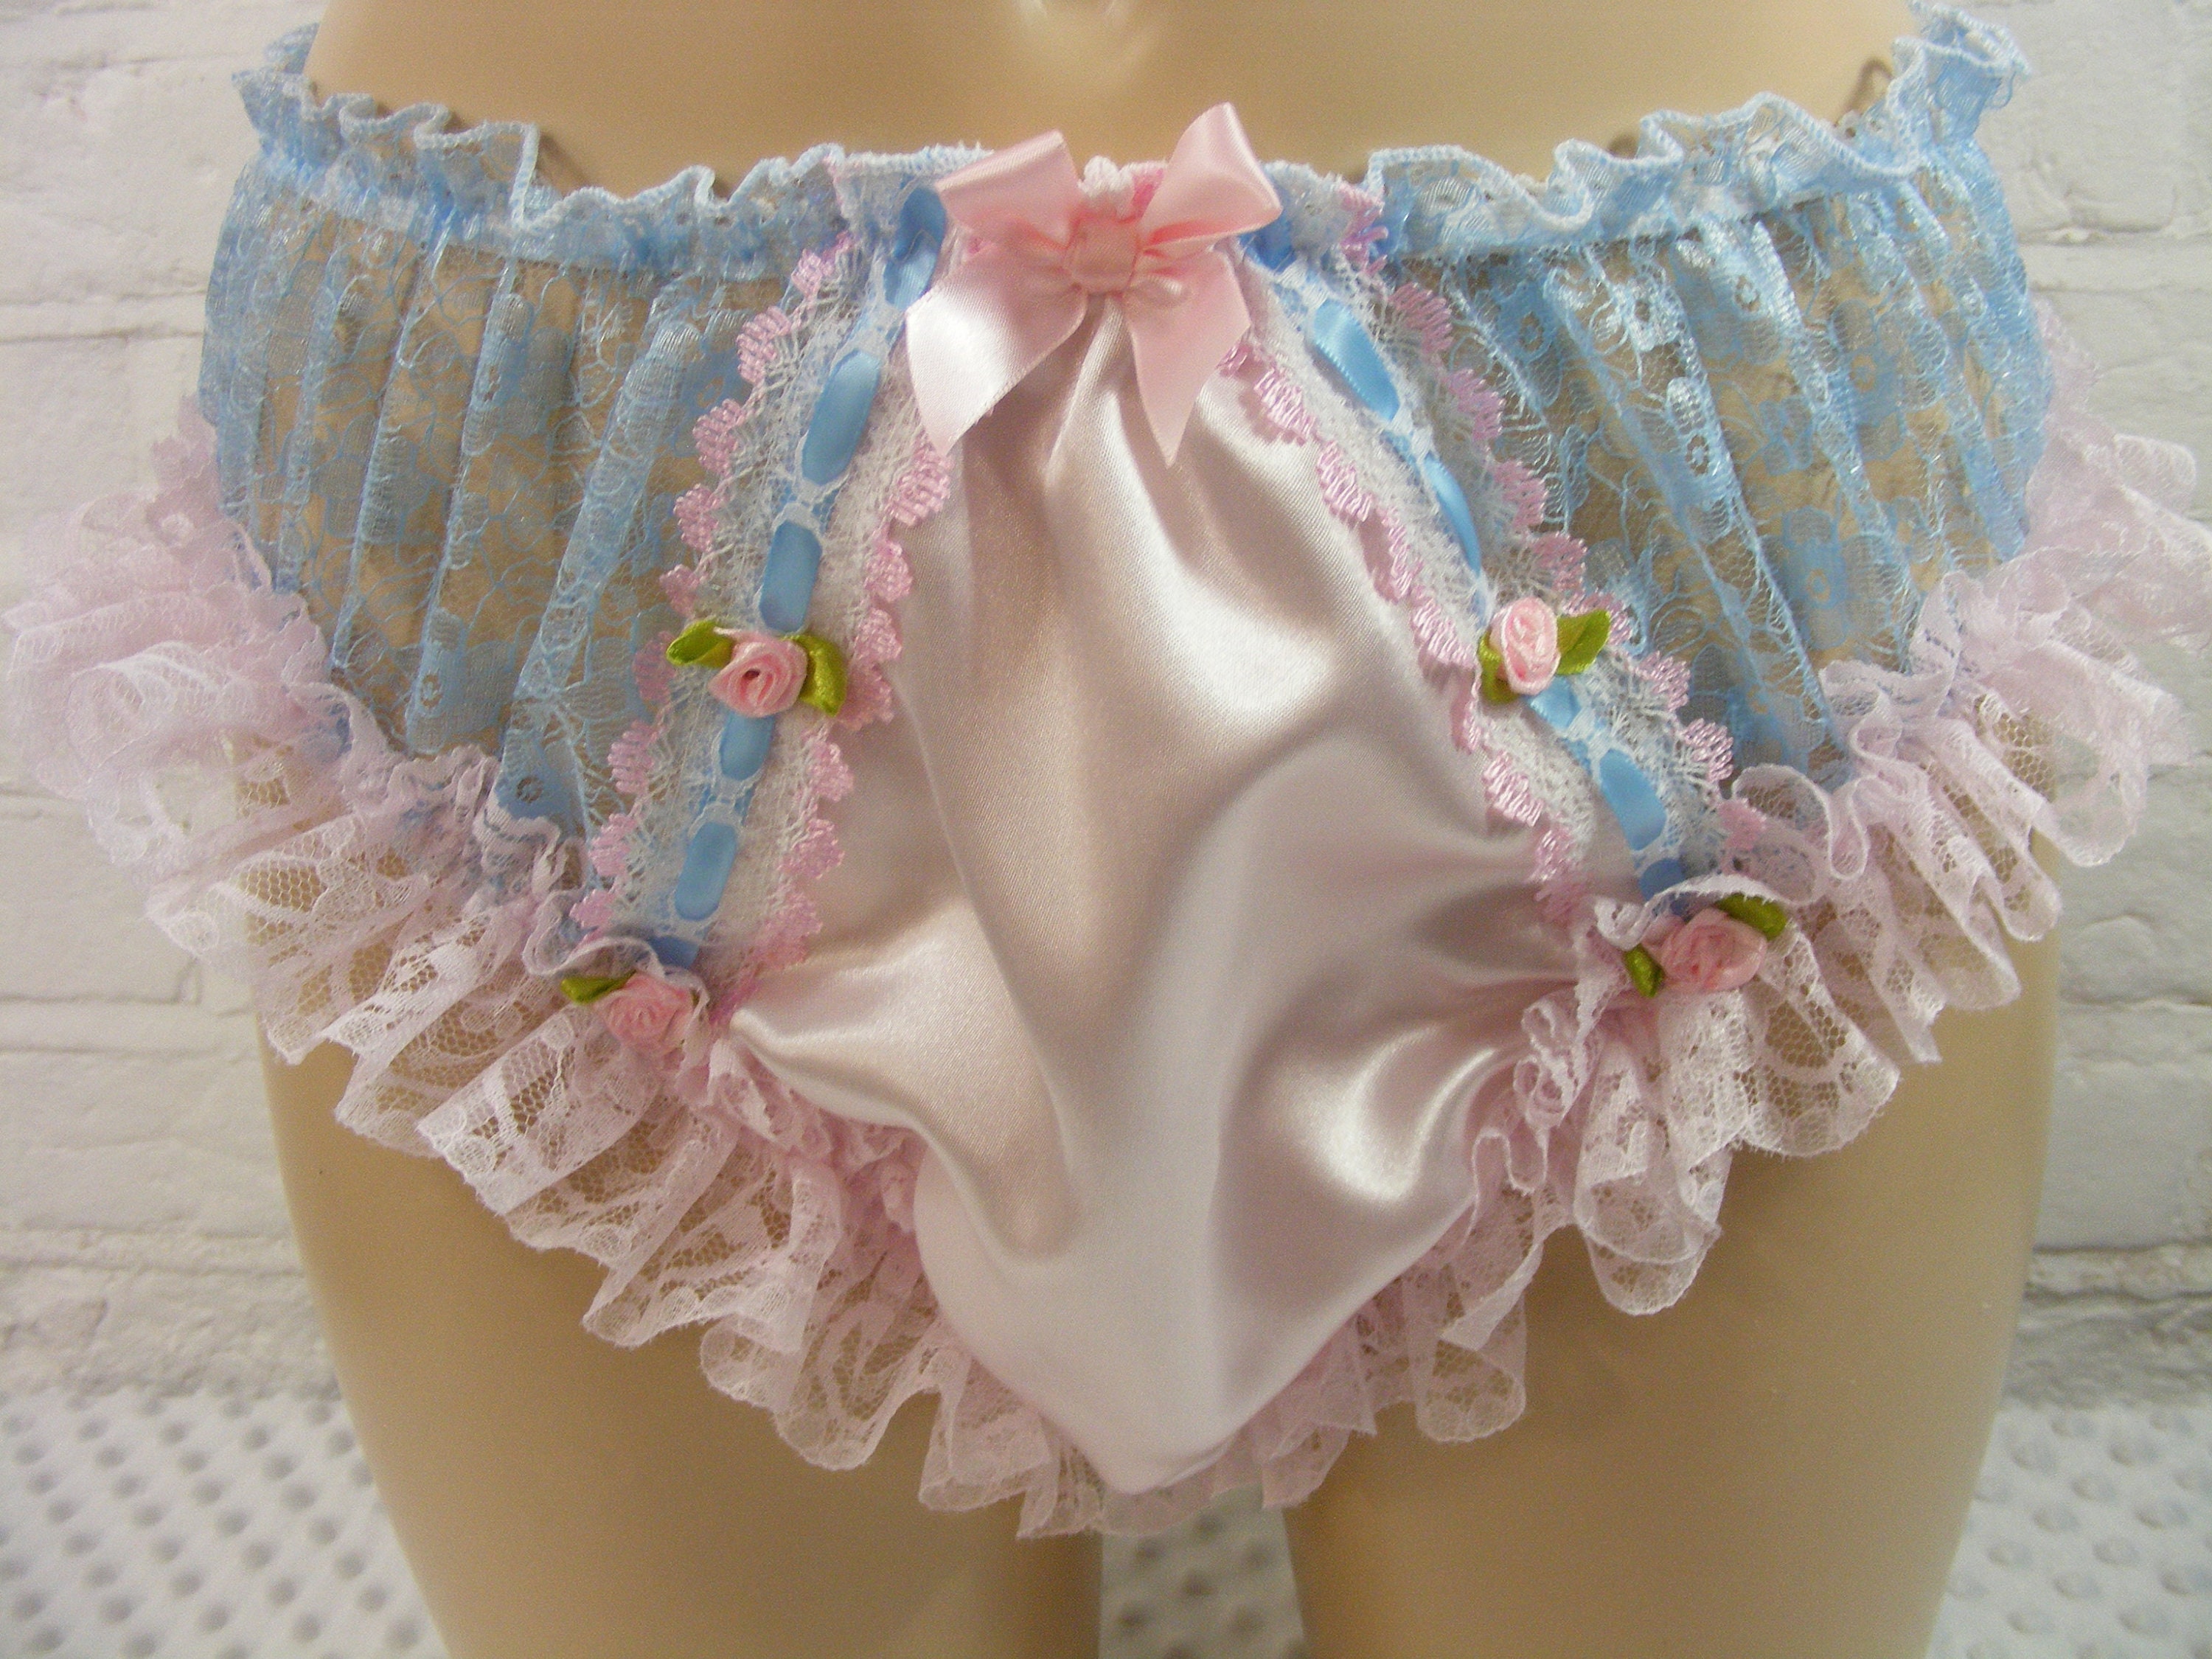 Sissy satin lace frilly panties knickers lingerie plus sizes available -   Portugal